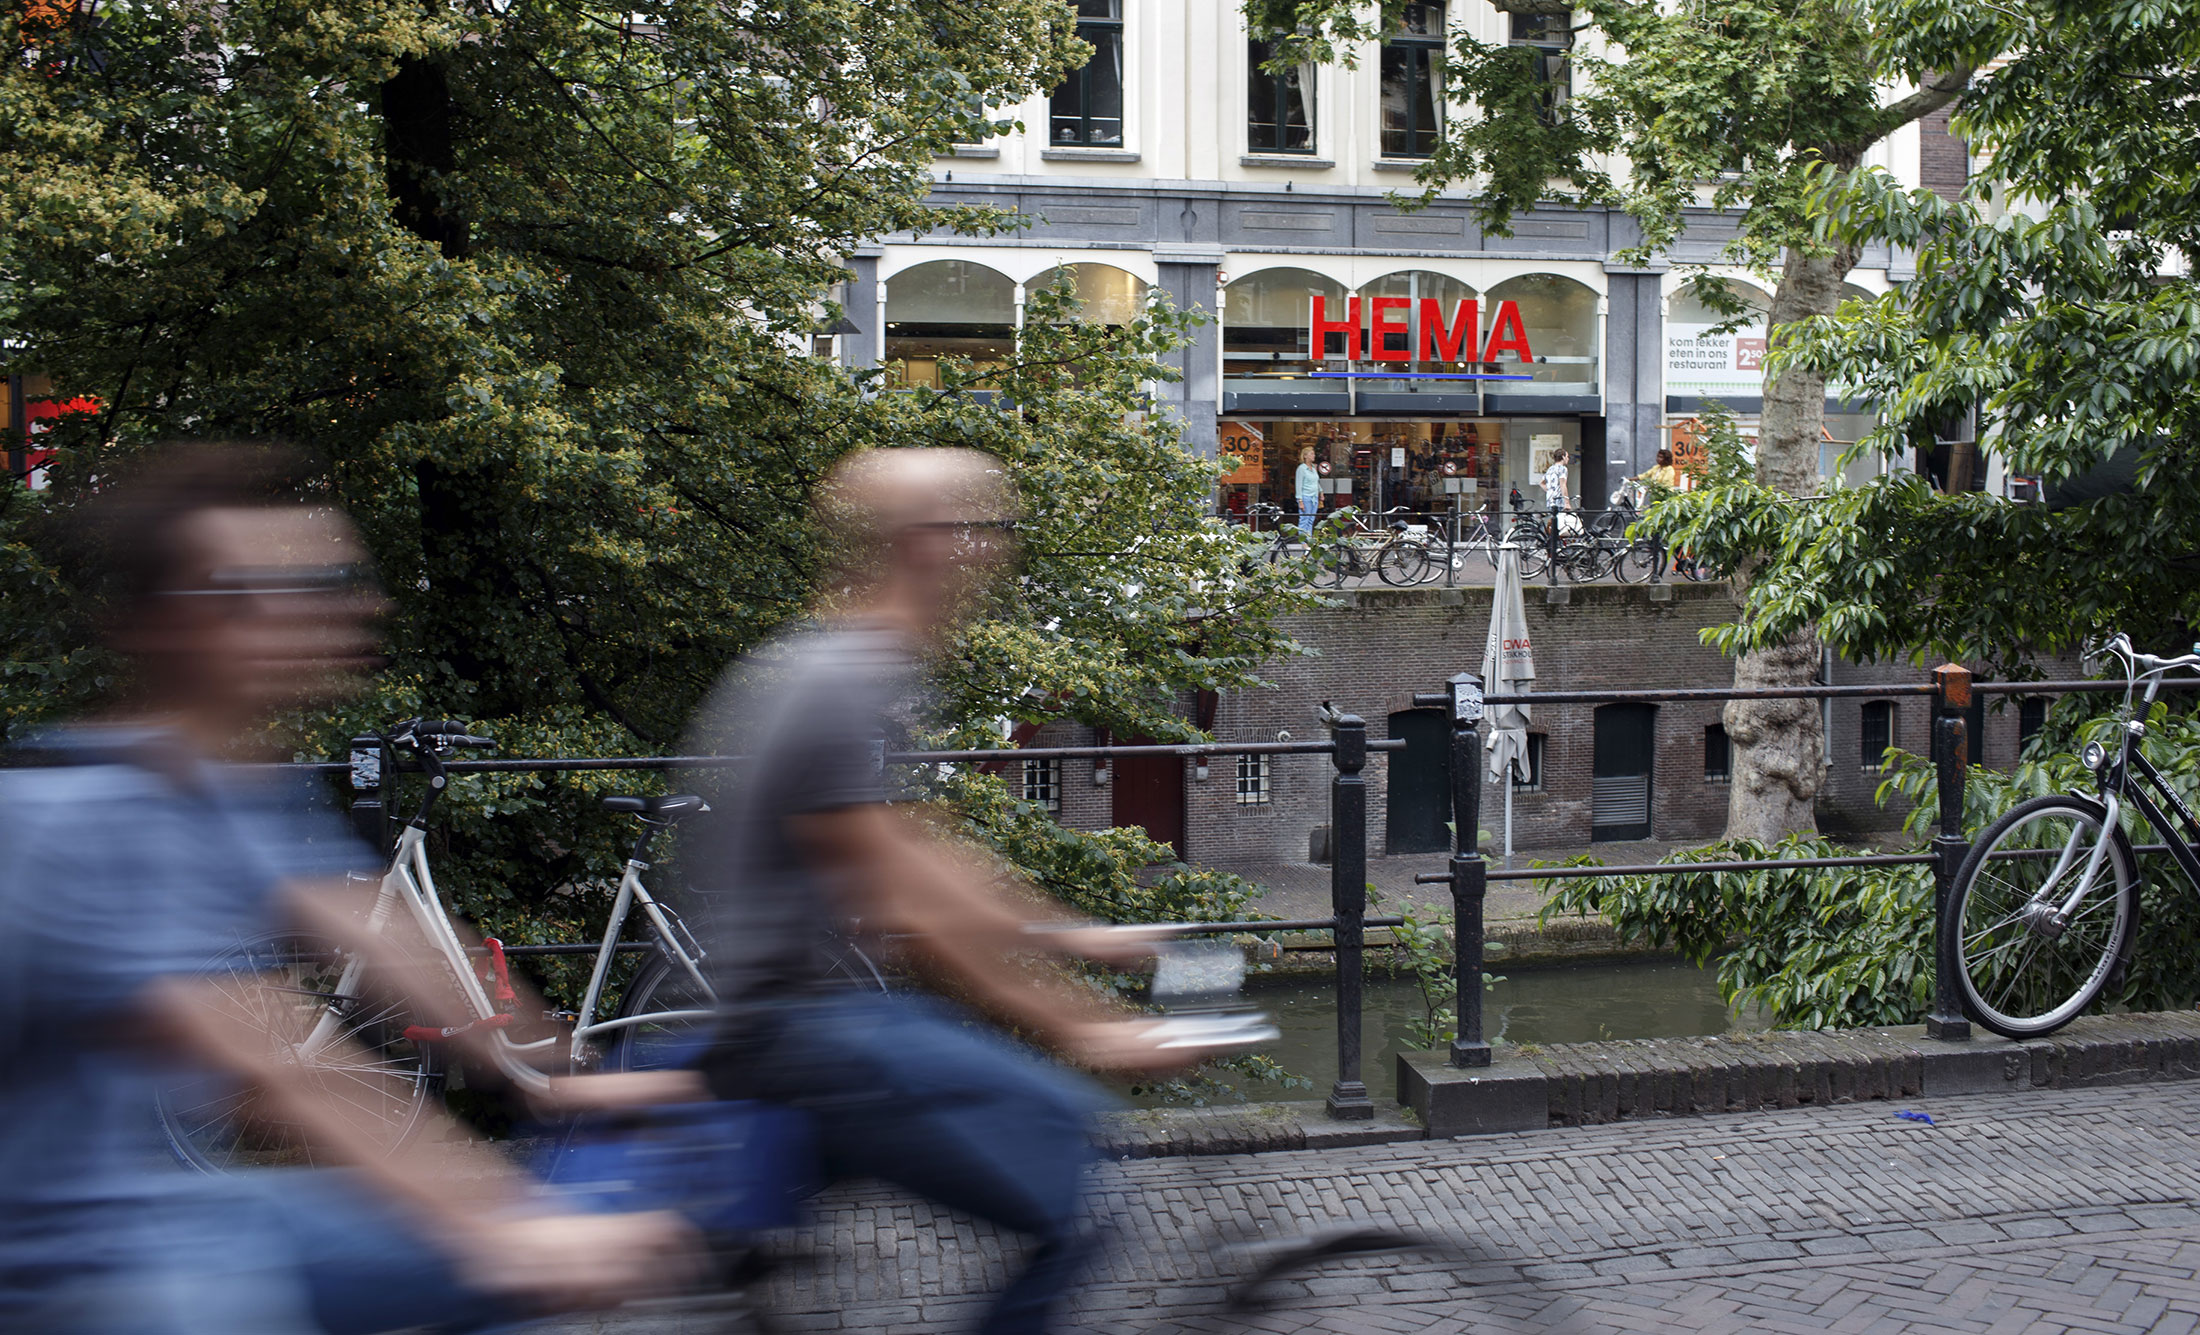 Cyclists ride bicycles near a Hema store in Utrecht.
